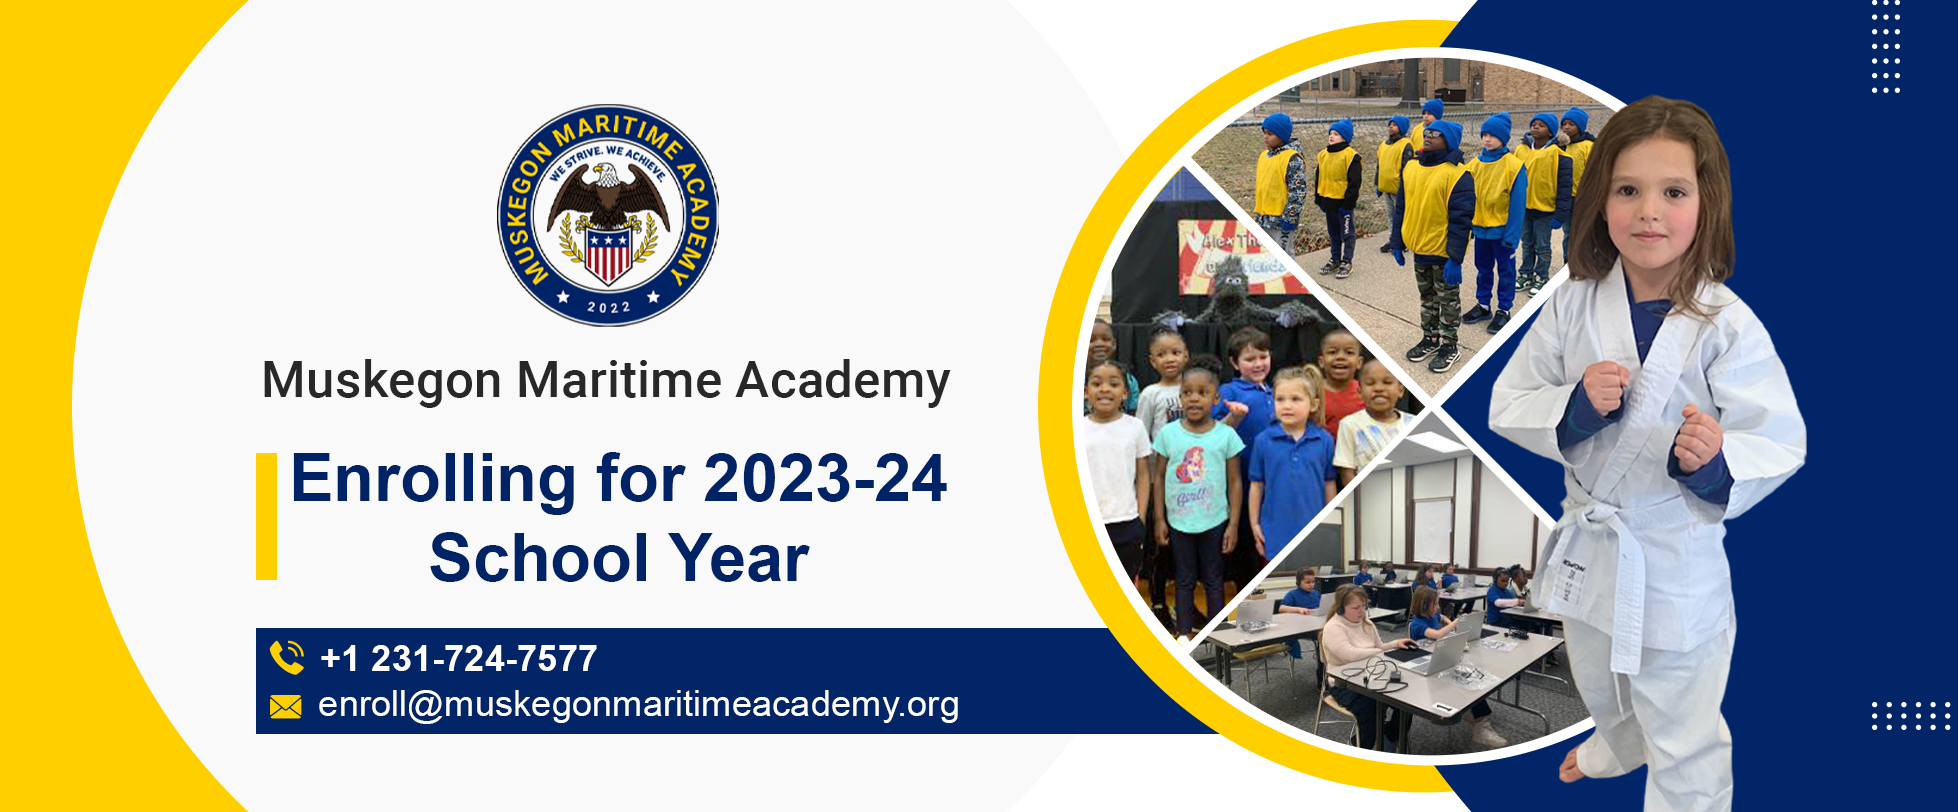 Muskegon Maritime Academy Enrolling for the 2023-24 School Year. Phone +1 231-724-7577 or Email enroll@muskegonmaritimeacademy.org